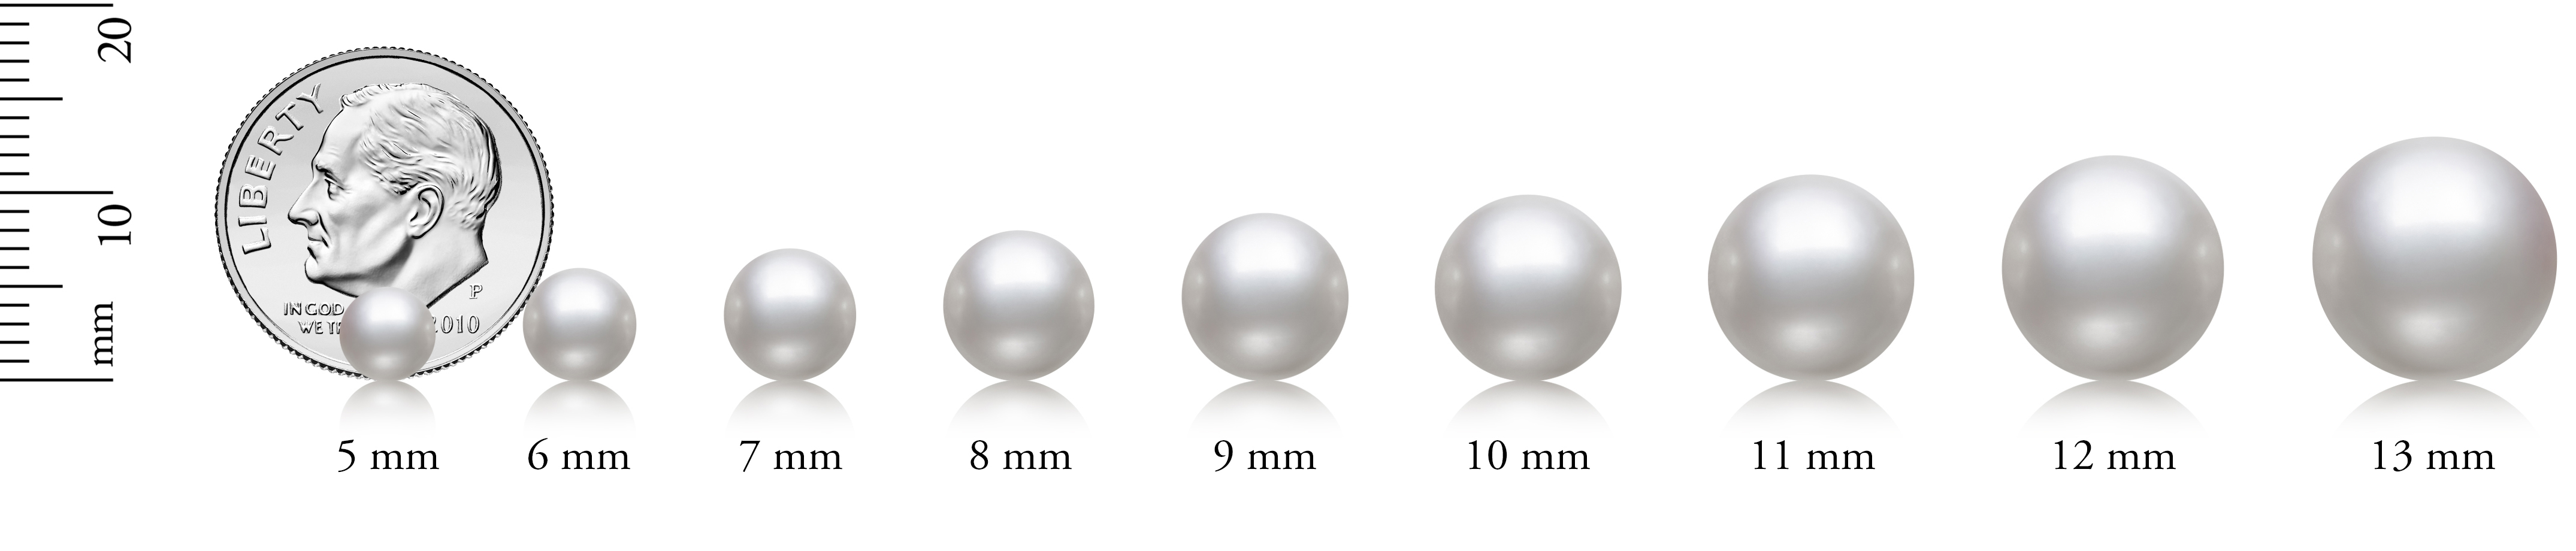 different pearl sizes compared to a US Dime coin